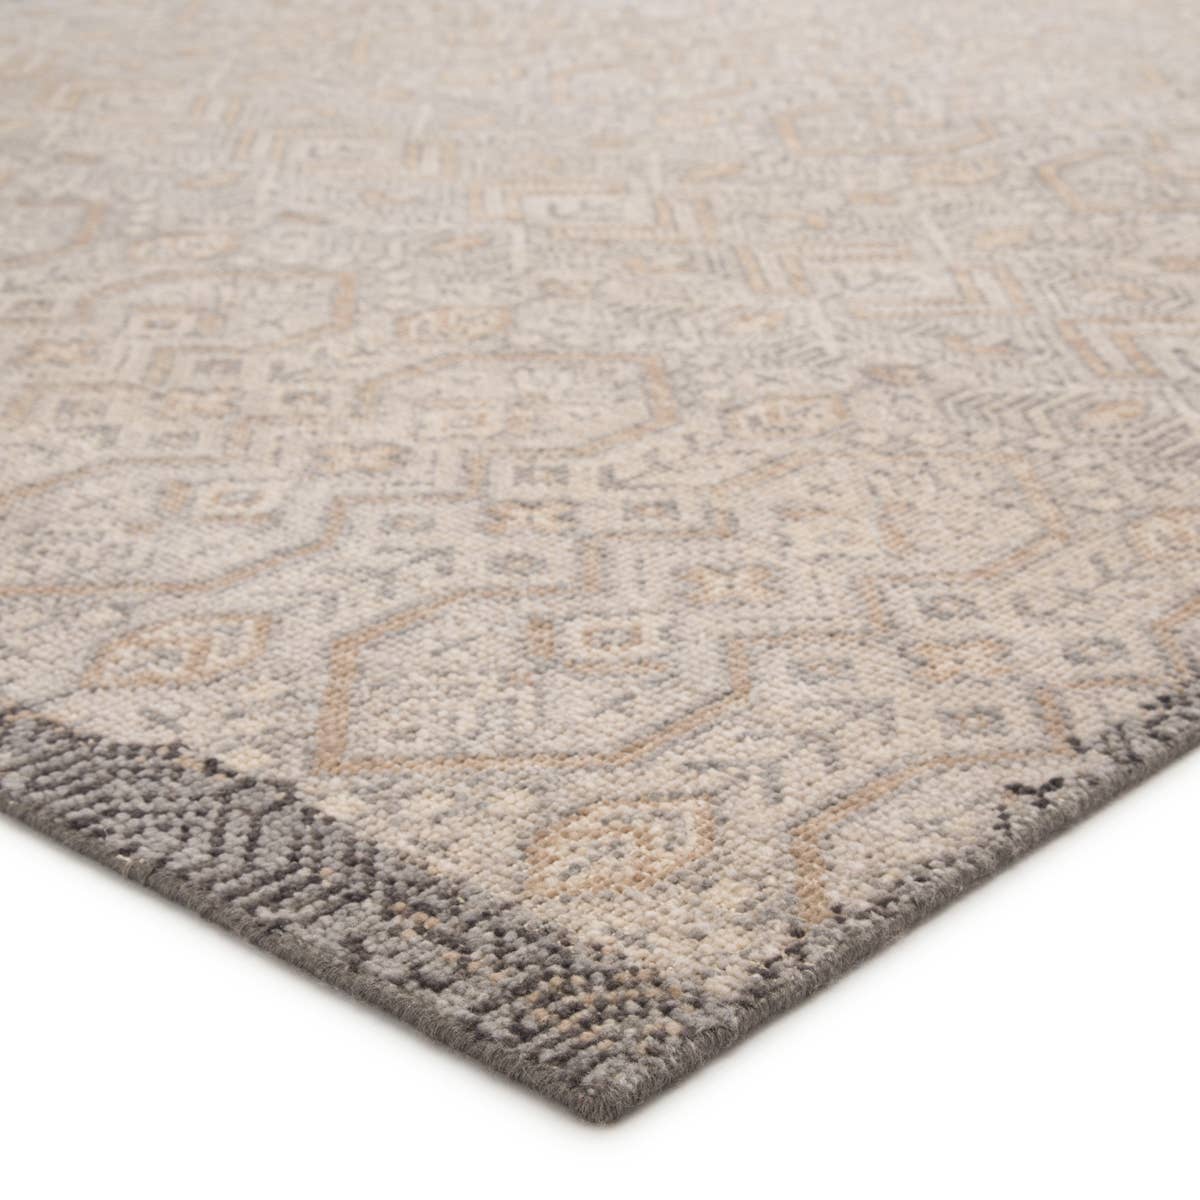 The Revolution collection is inspired by traditional style and beautifully detailed antique textile designs. The hand-knotted Prospect area rug showcases a captivating geometric design in muted tones of gray and gold. A charcoal edge creates a unique border effect around this globally inspired wool rug.  Hand-Knotted 100% Wool REL10